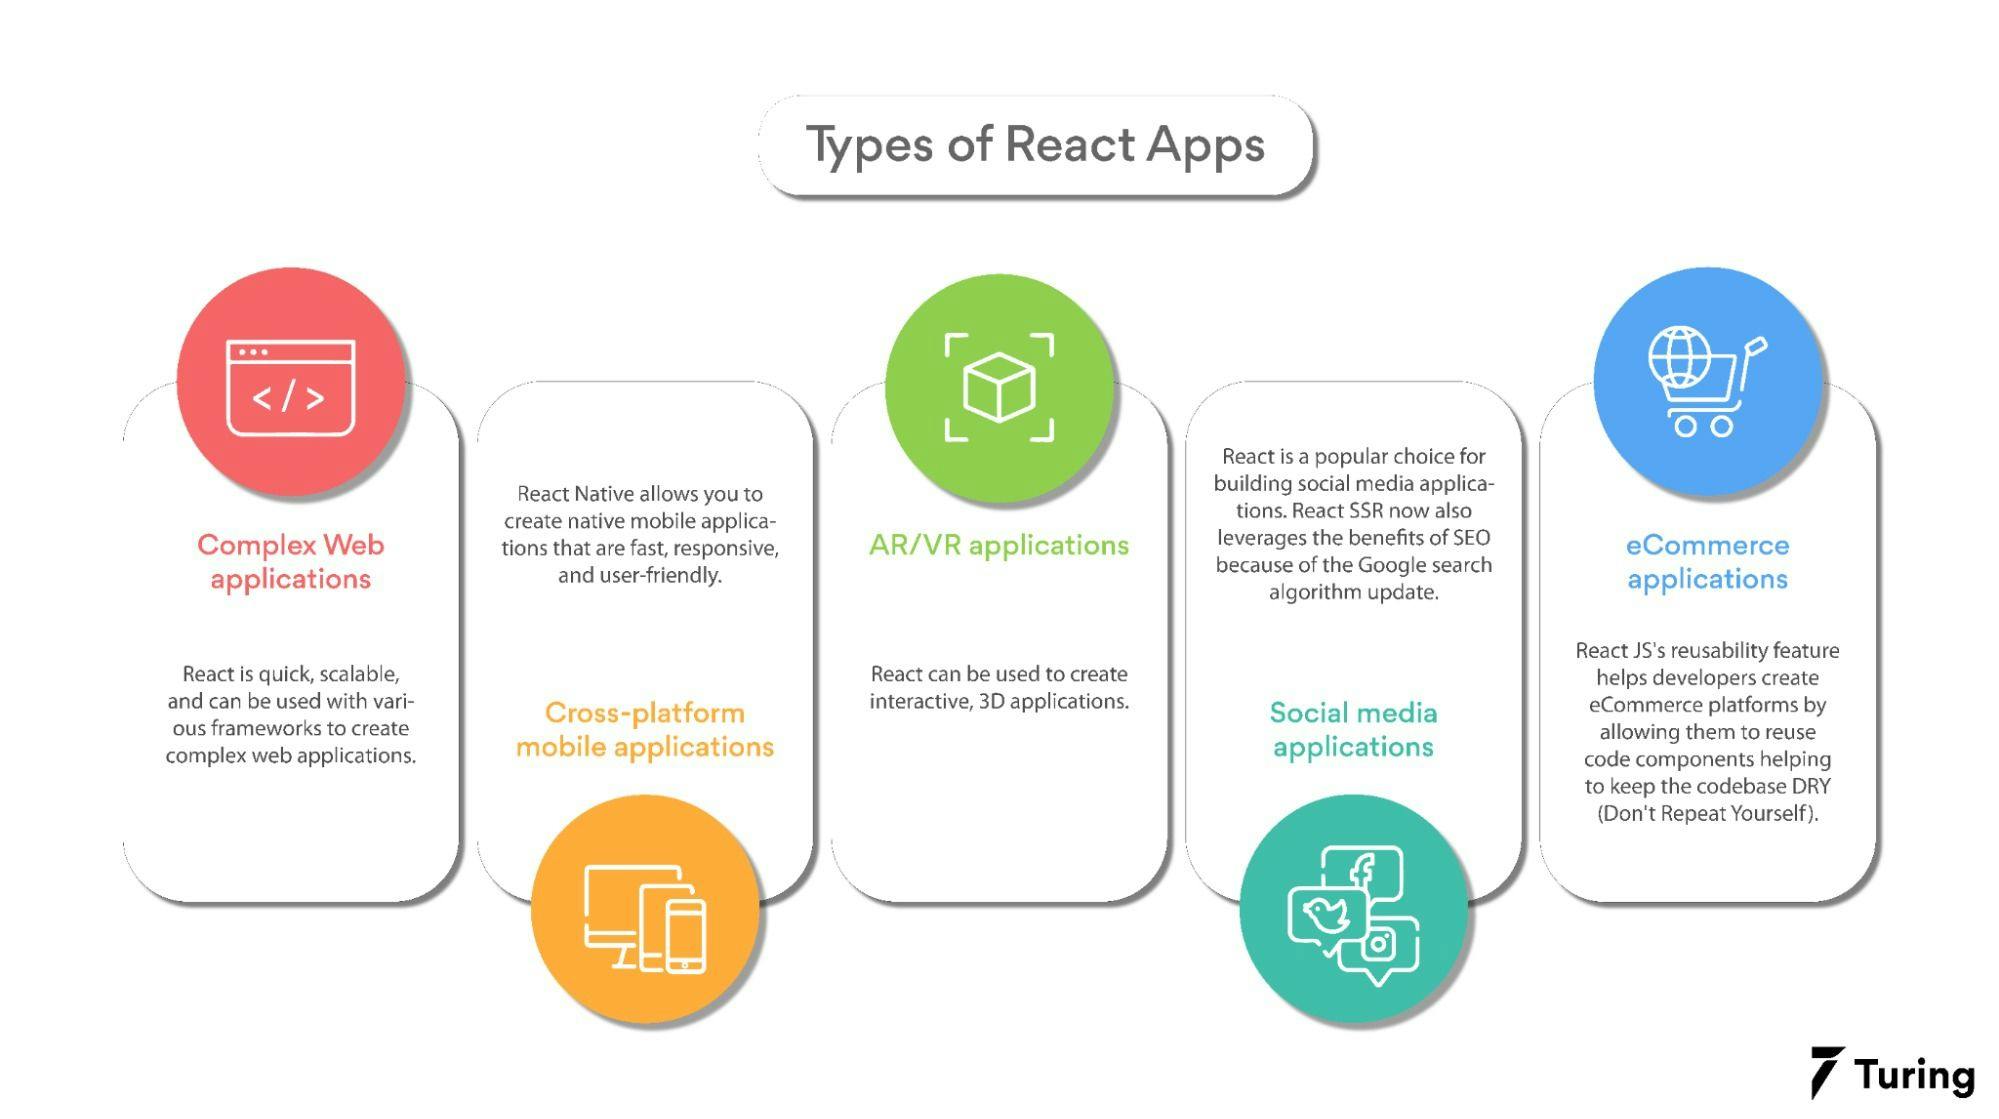 What Types of Apps Can Be Built With React_2_11zon.webp